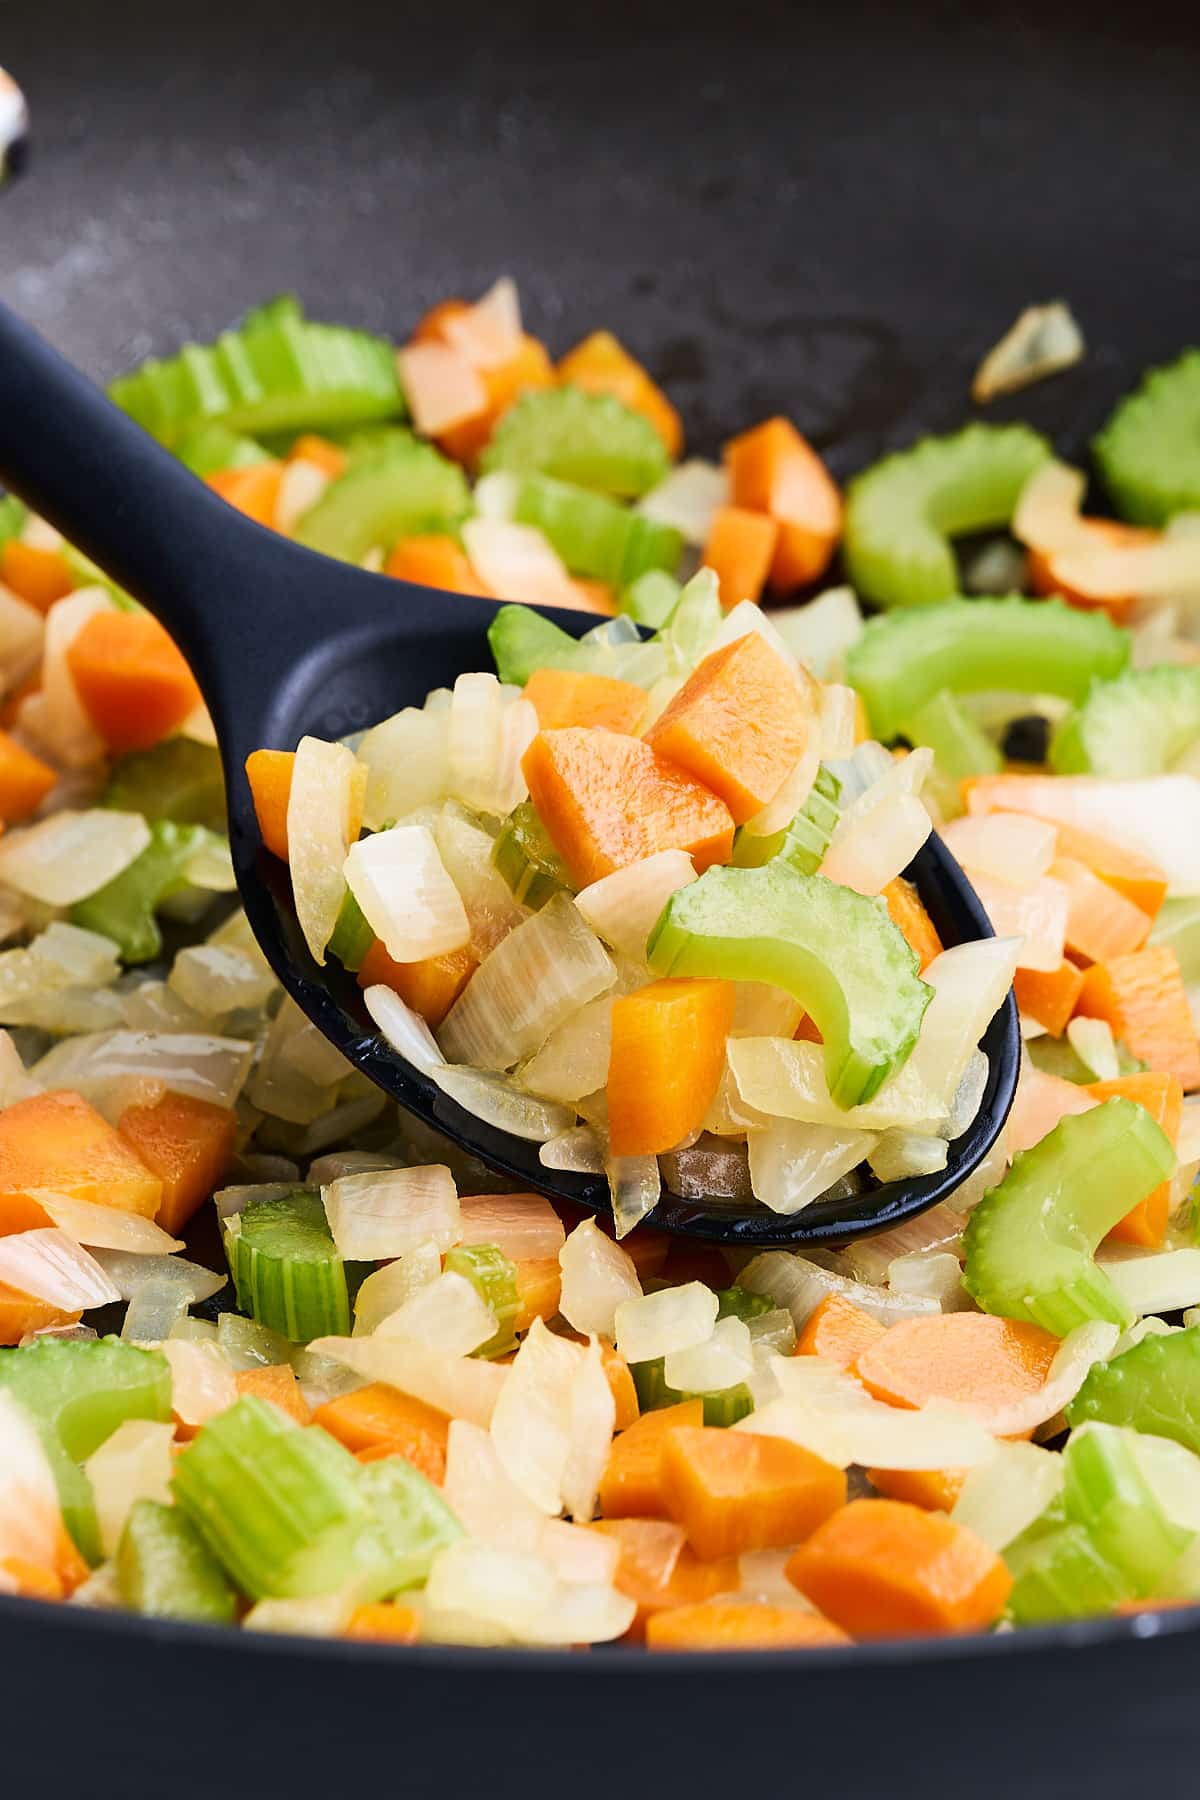 Spoonful of mirepoix.